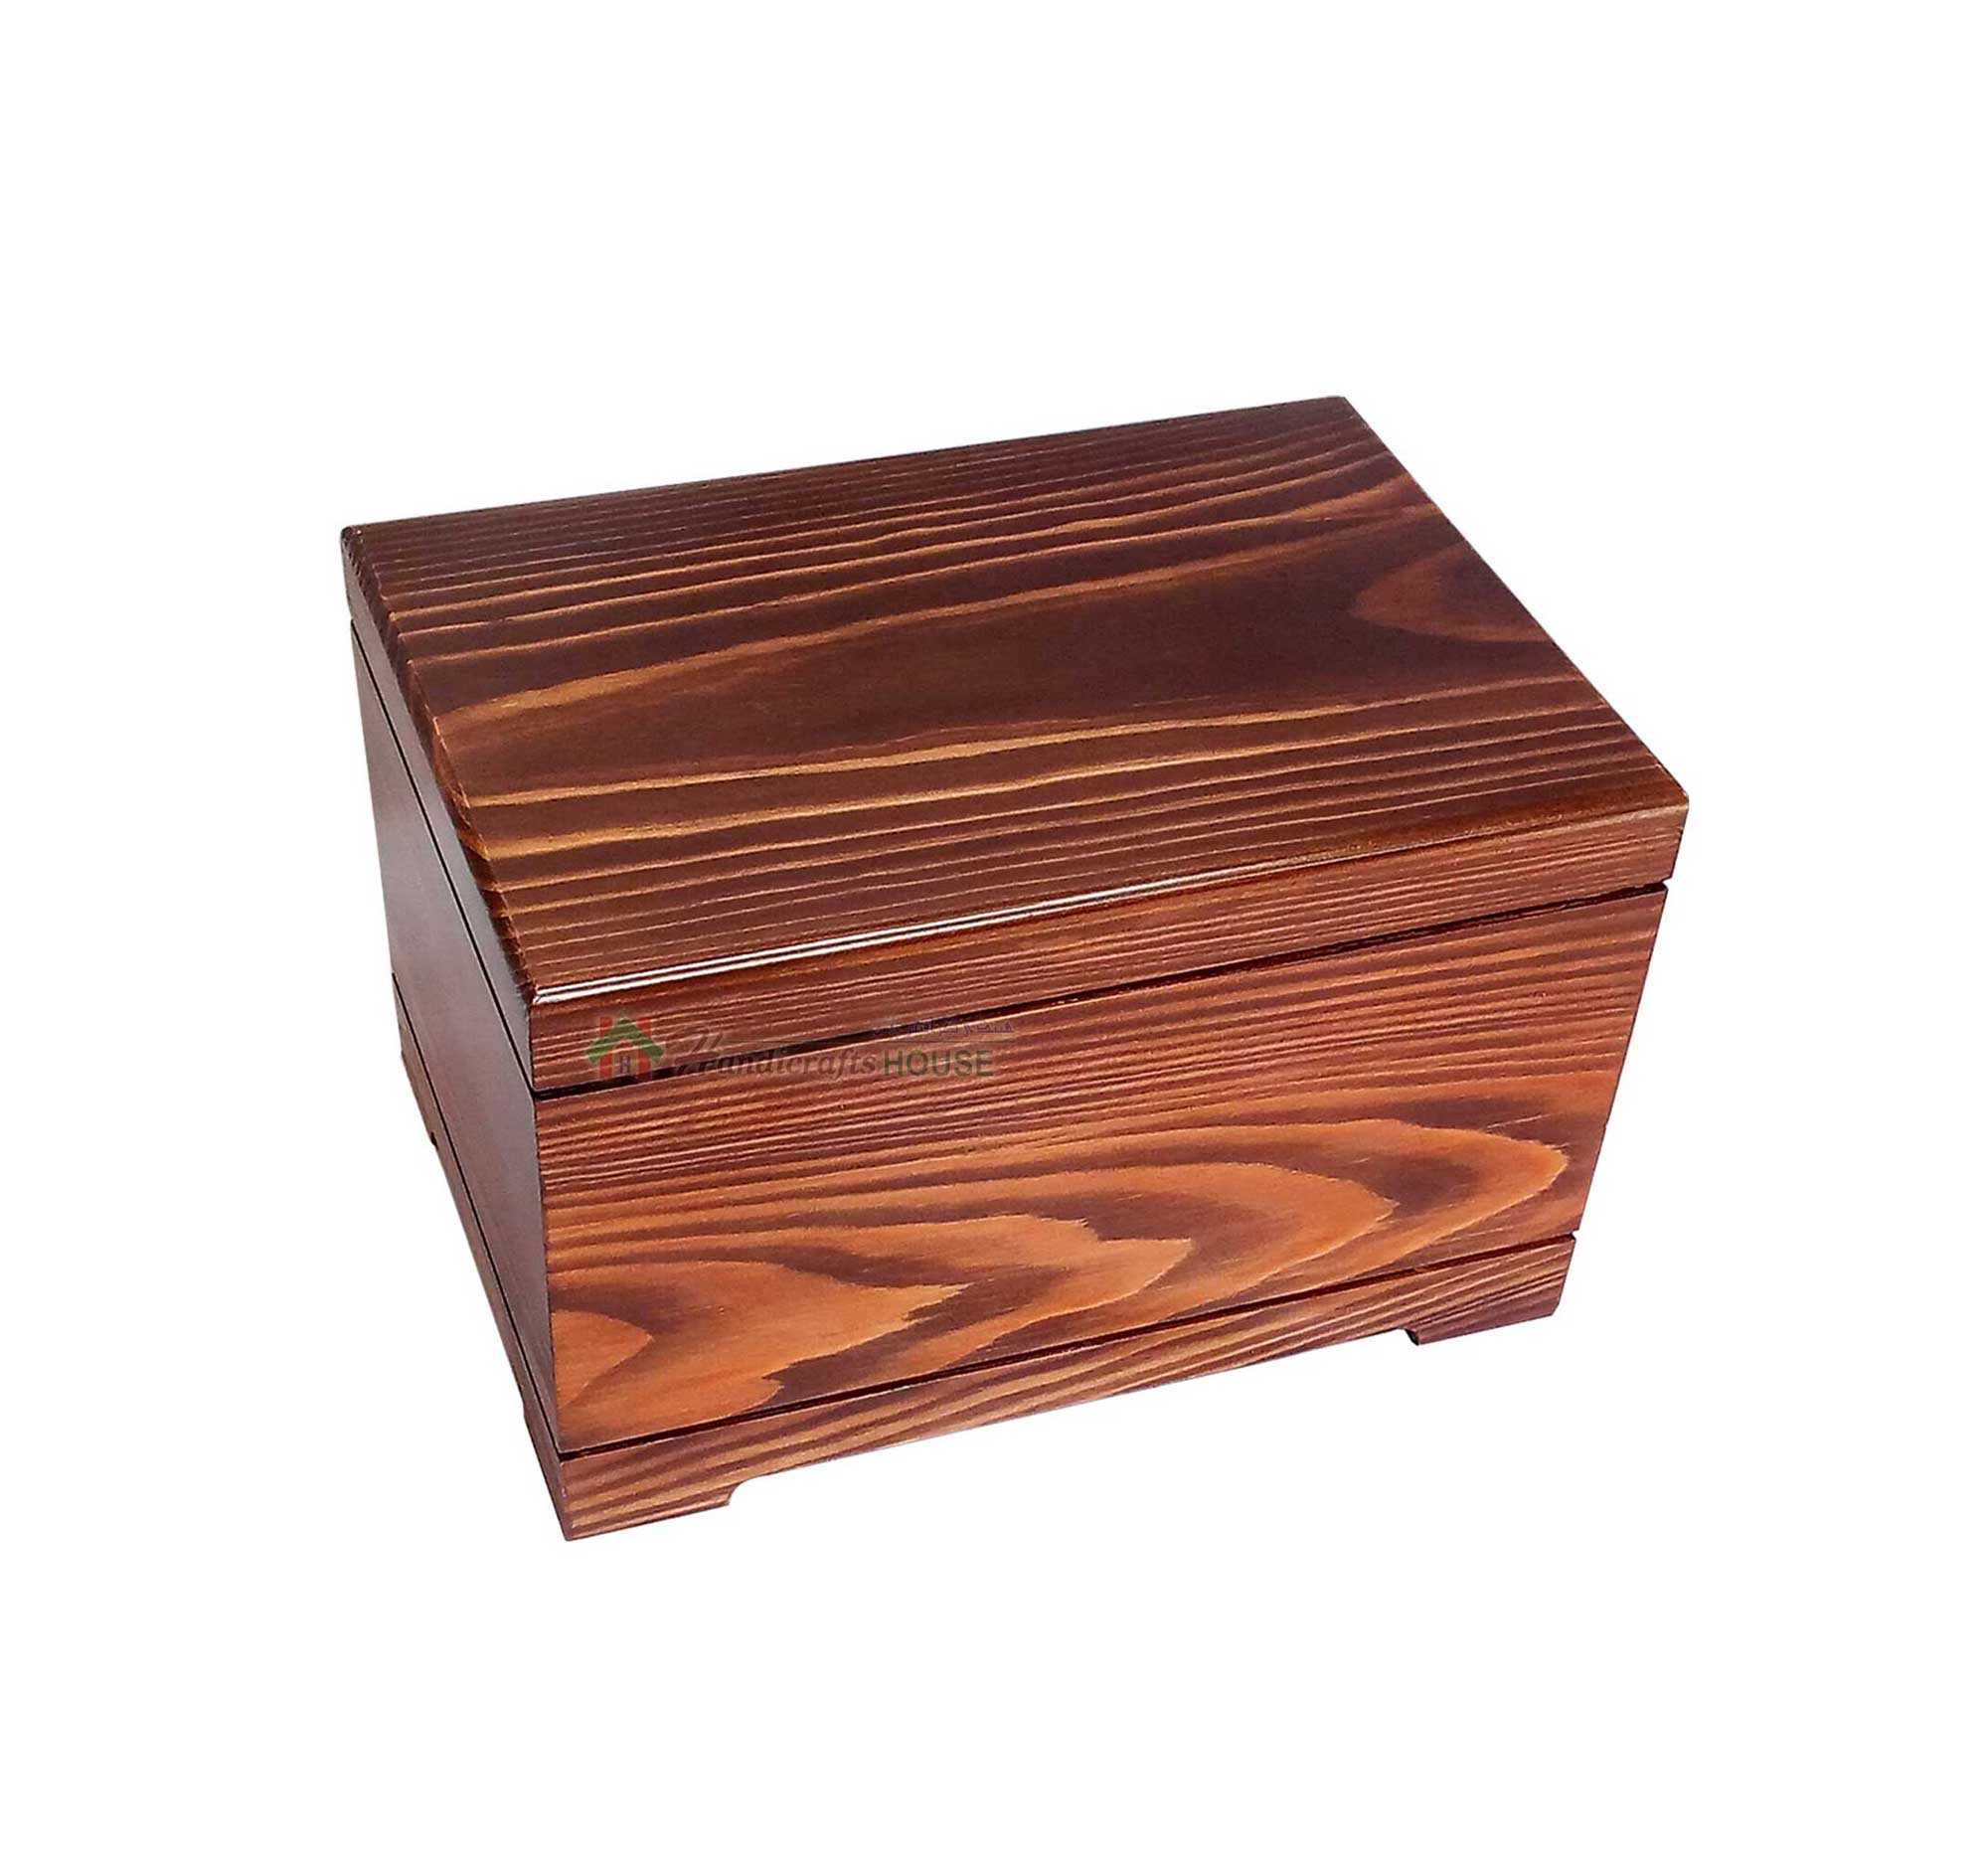 Wooden burial Urns For Human, Wood Casket, Home Decor Urn, Timber Box, Funeral Ashes Container